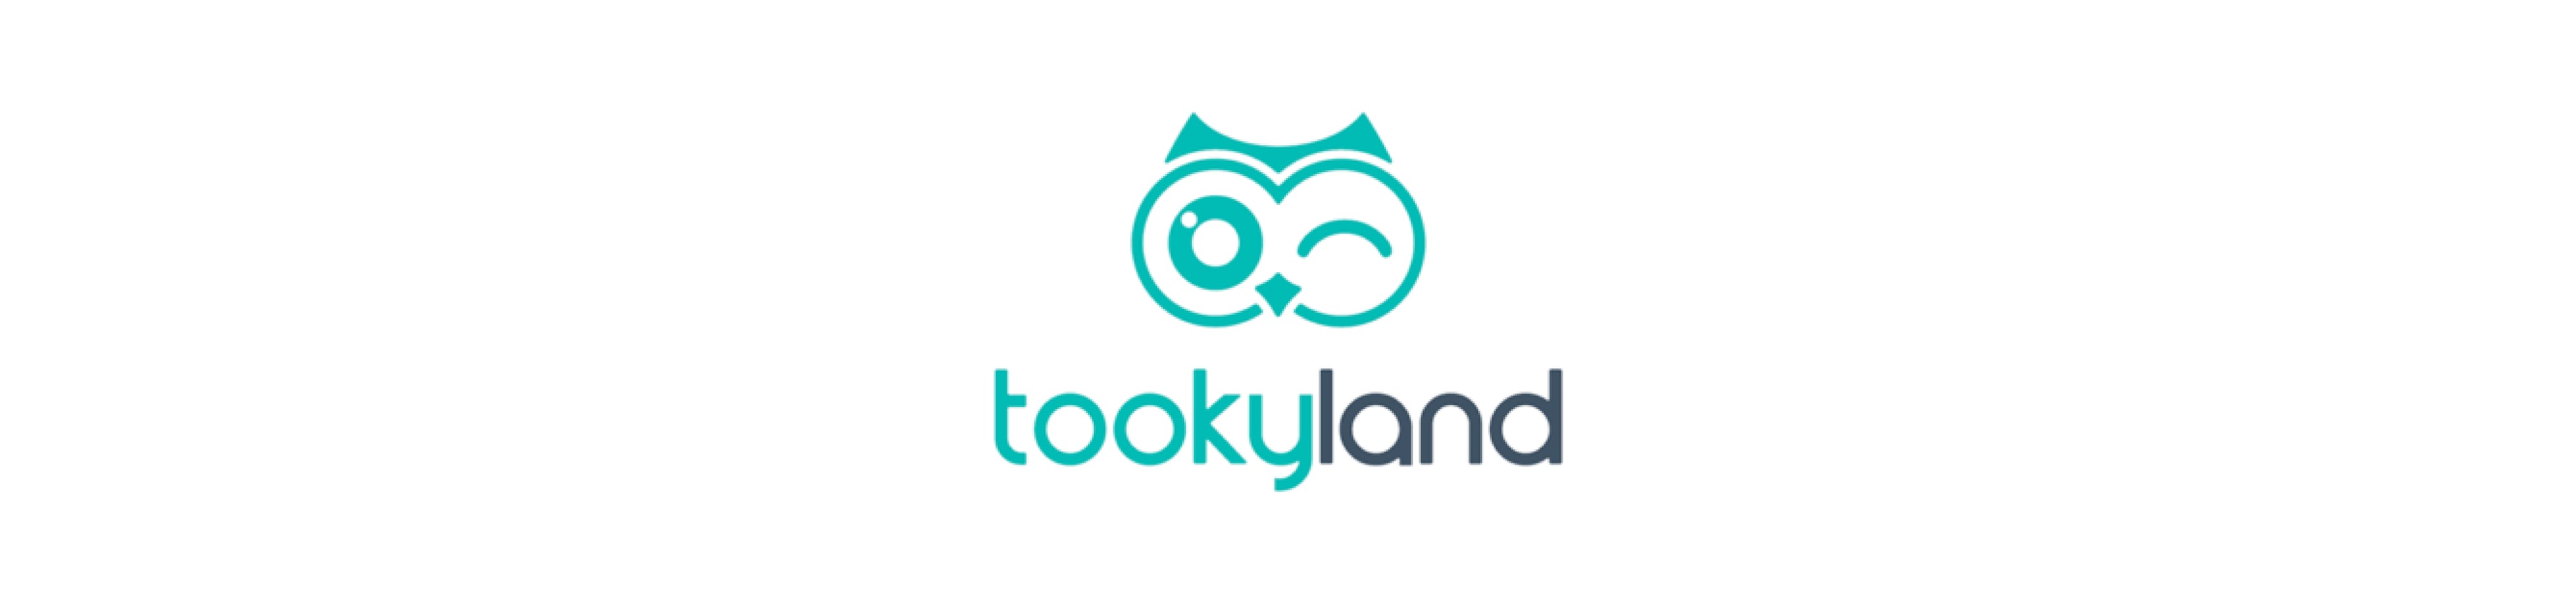 Tookyland Products